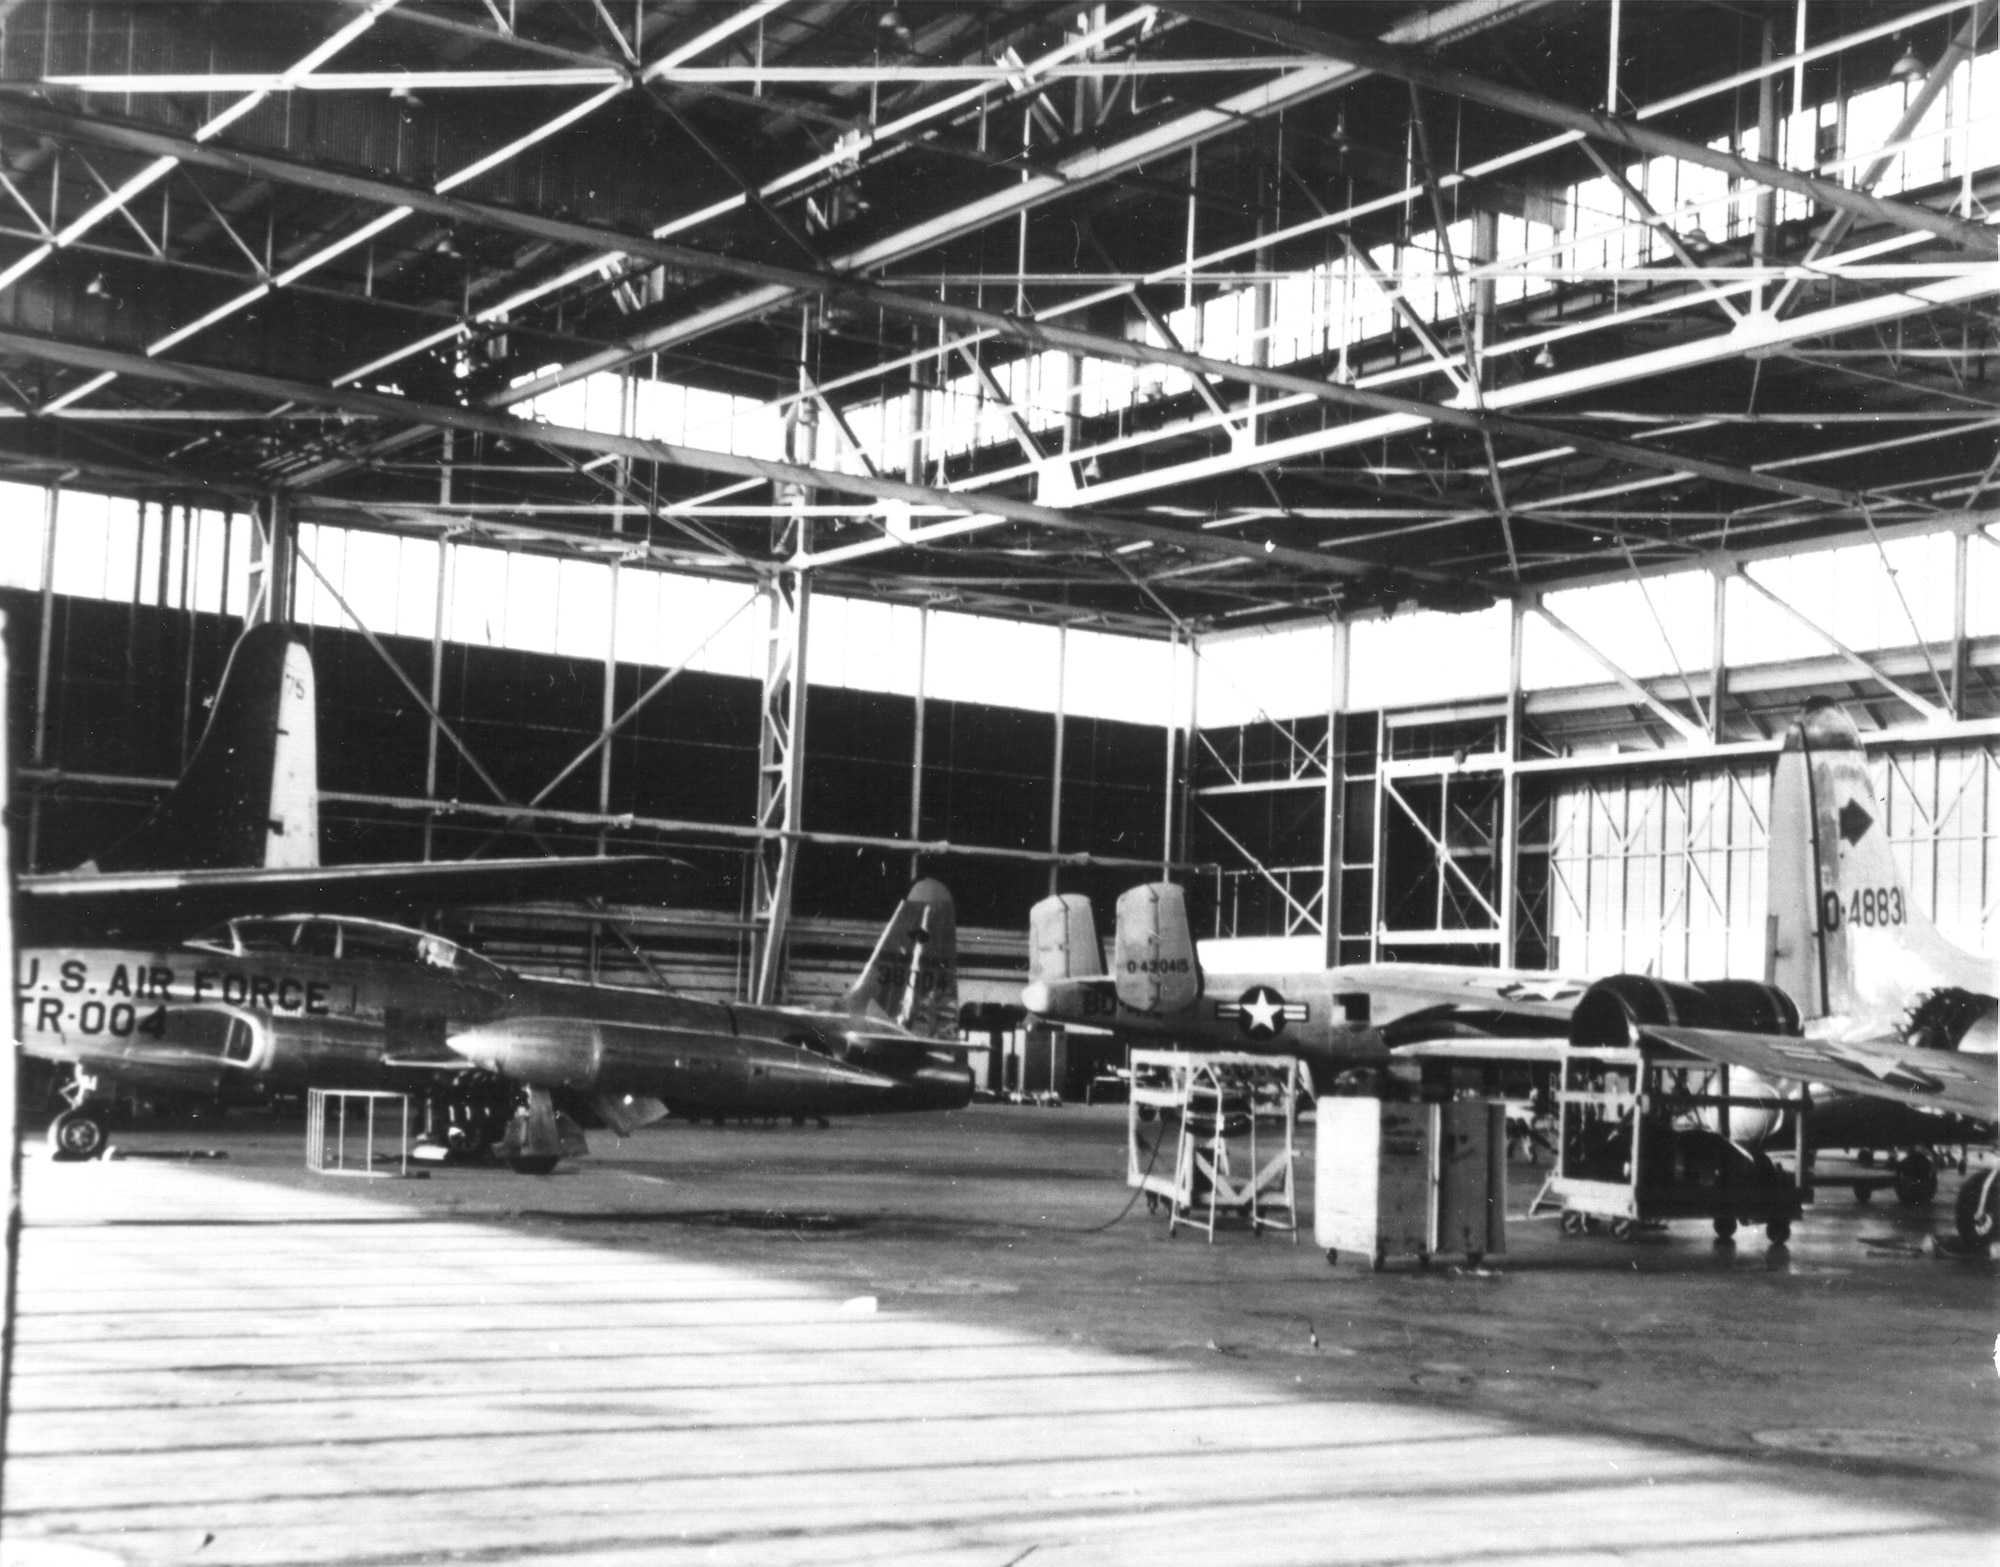 A T-33A Shooting Star wearing natural-metal and large aircraft identification markings sits inside a hangar at Tinker Air Force Base, Oklahoma in this undated photo from the Tinker archives.